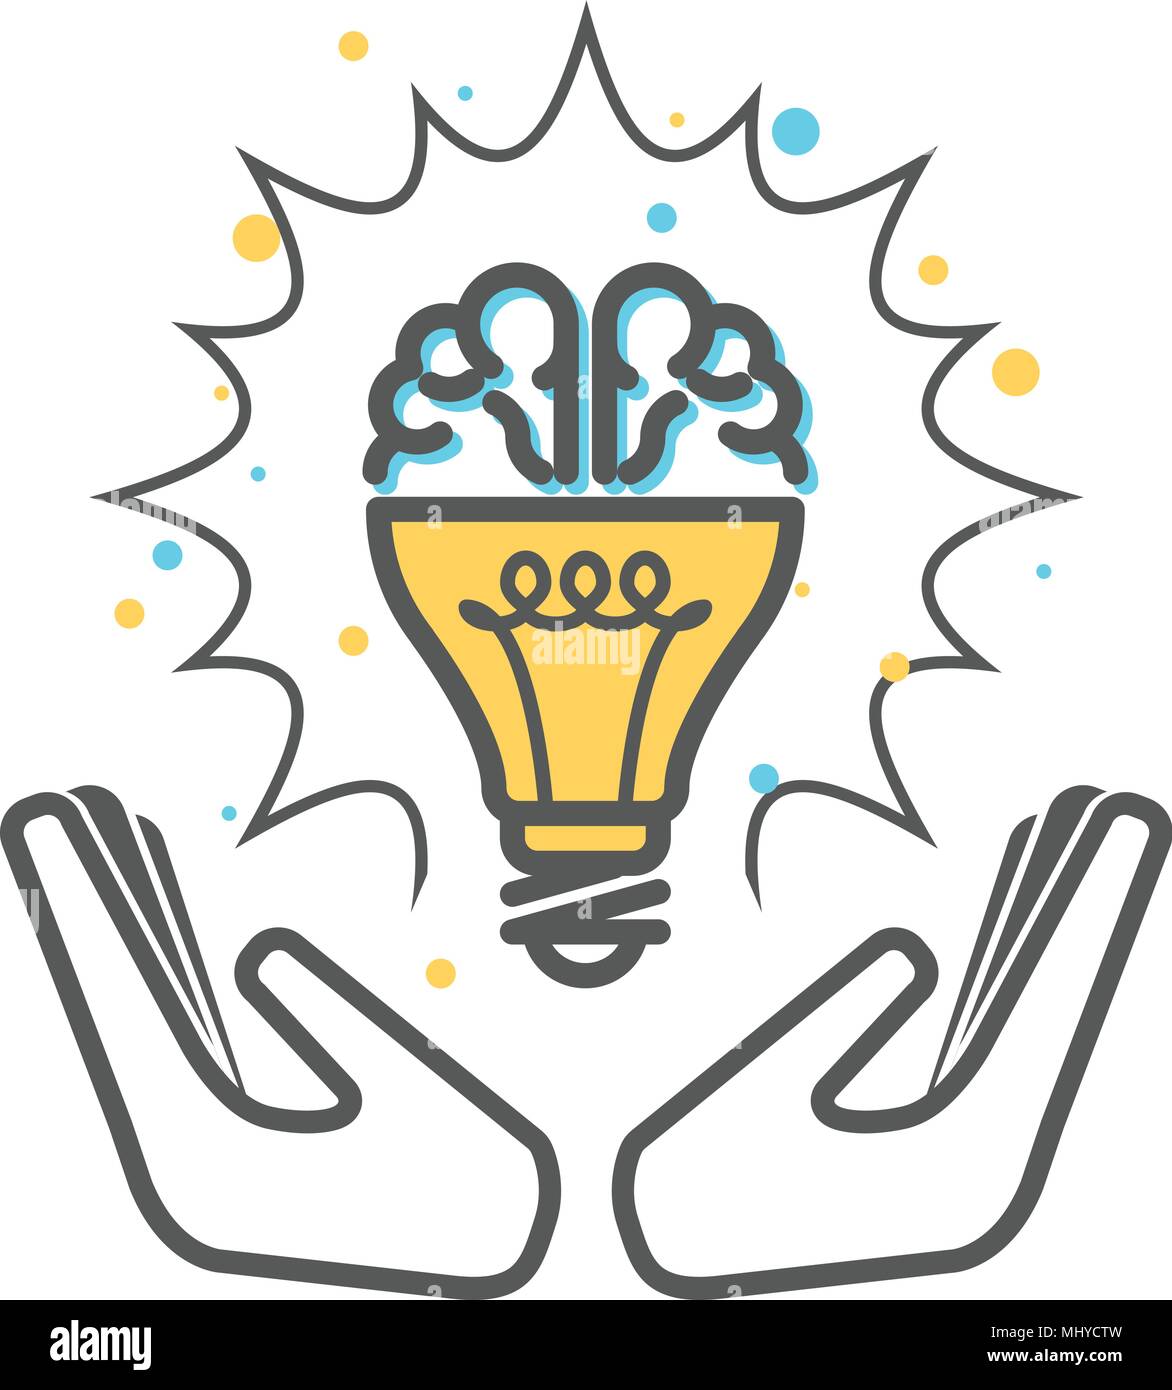 Creative idea - light bulb and brain icon supported with hands Stock Vector